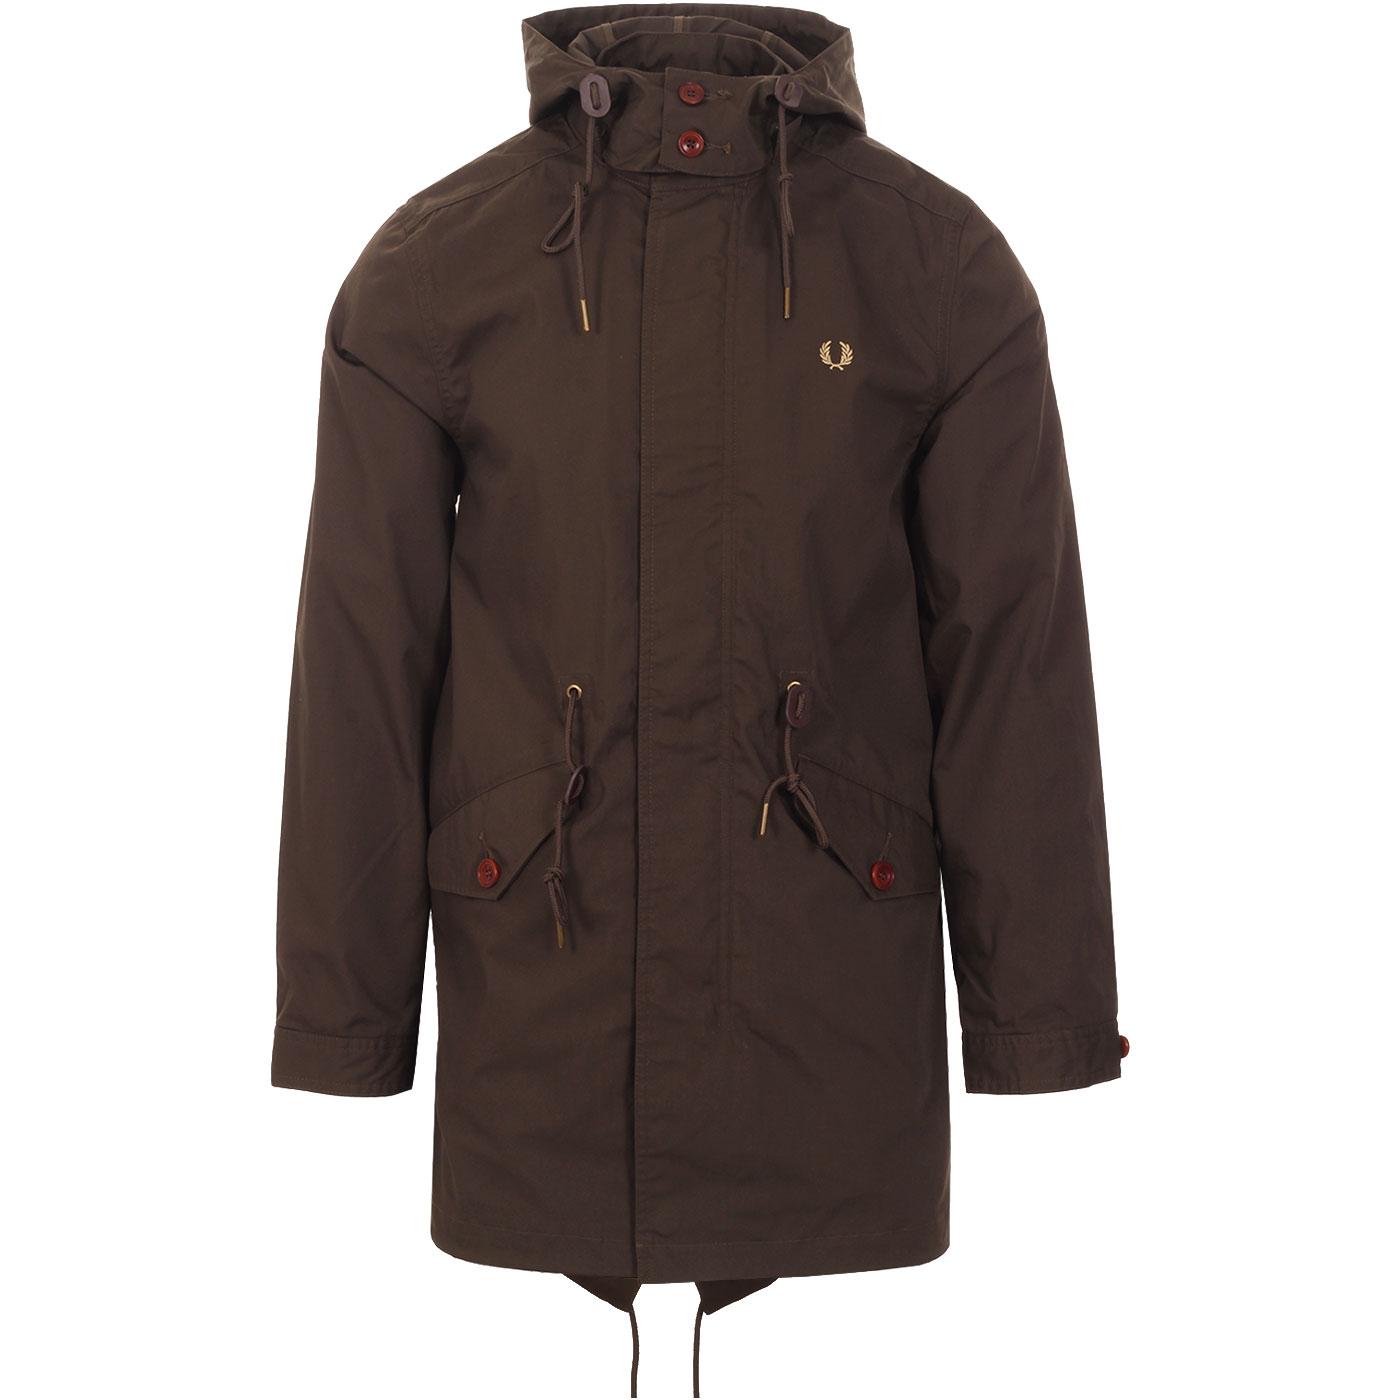 FRED PERRY Men's Sixties Mod Fishtail Parka Jacket